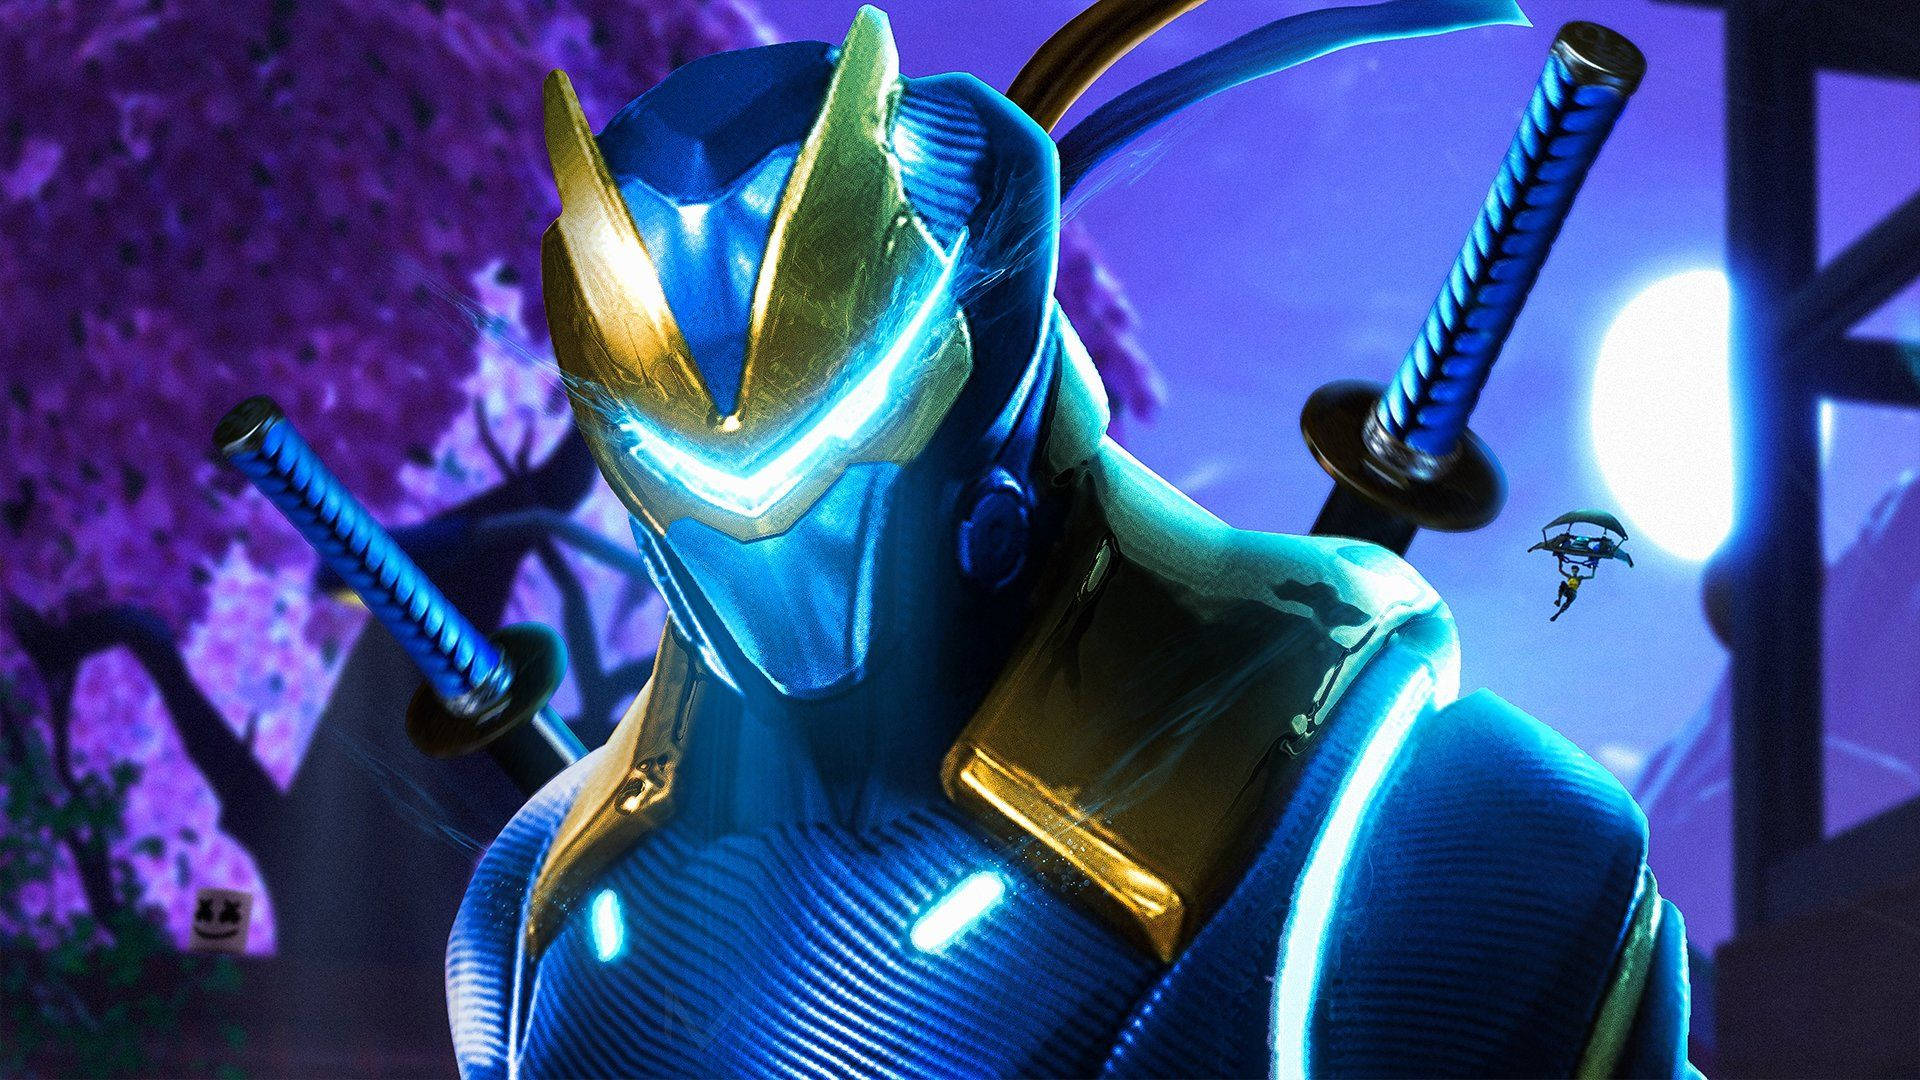 Cool Fortnite Omega Outfit Wallpaper